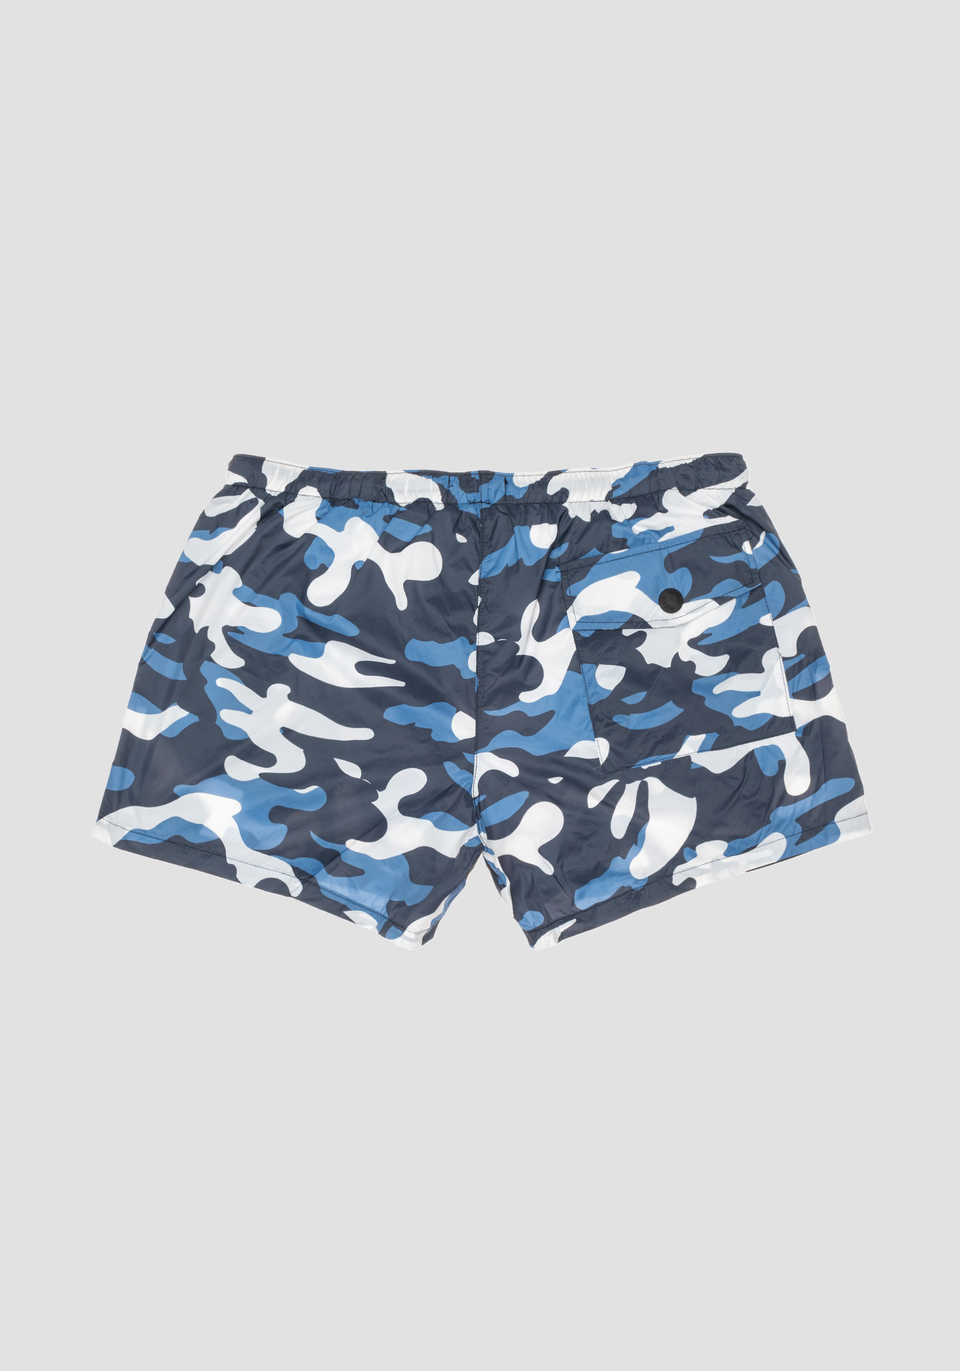 SLIM-FIT SWIMMING TRUNKS WITH CAMOUFLAGE PRINT - Antony Morato Online Shop